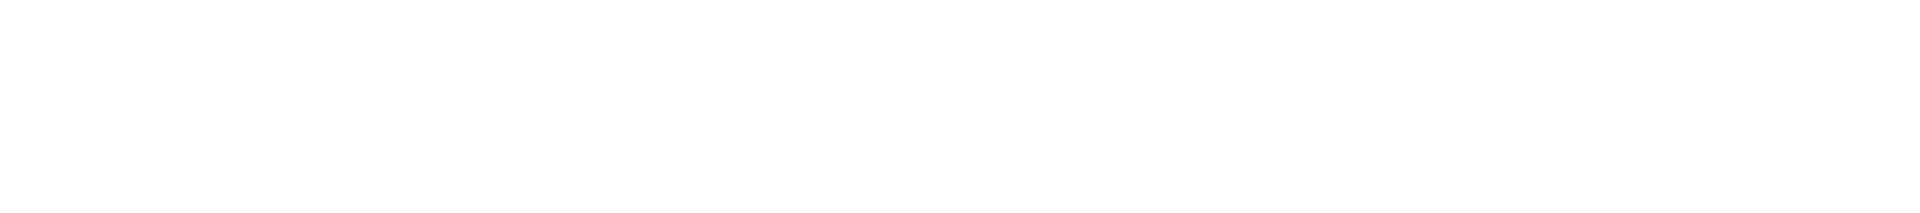 A green background with the word " nta " written in white.